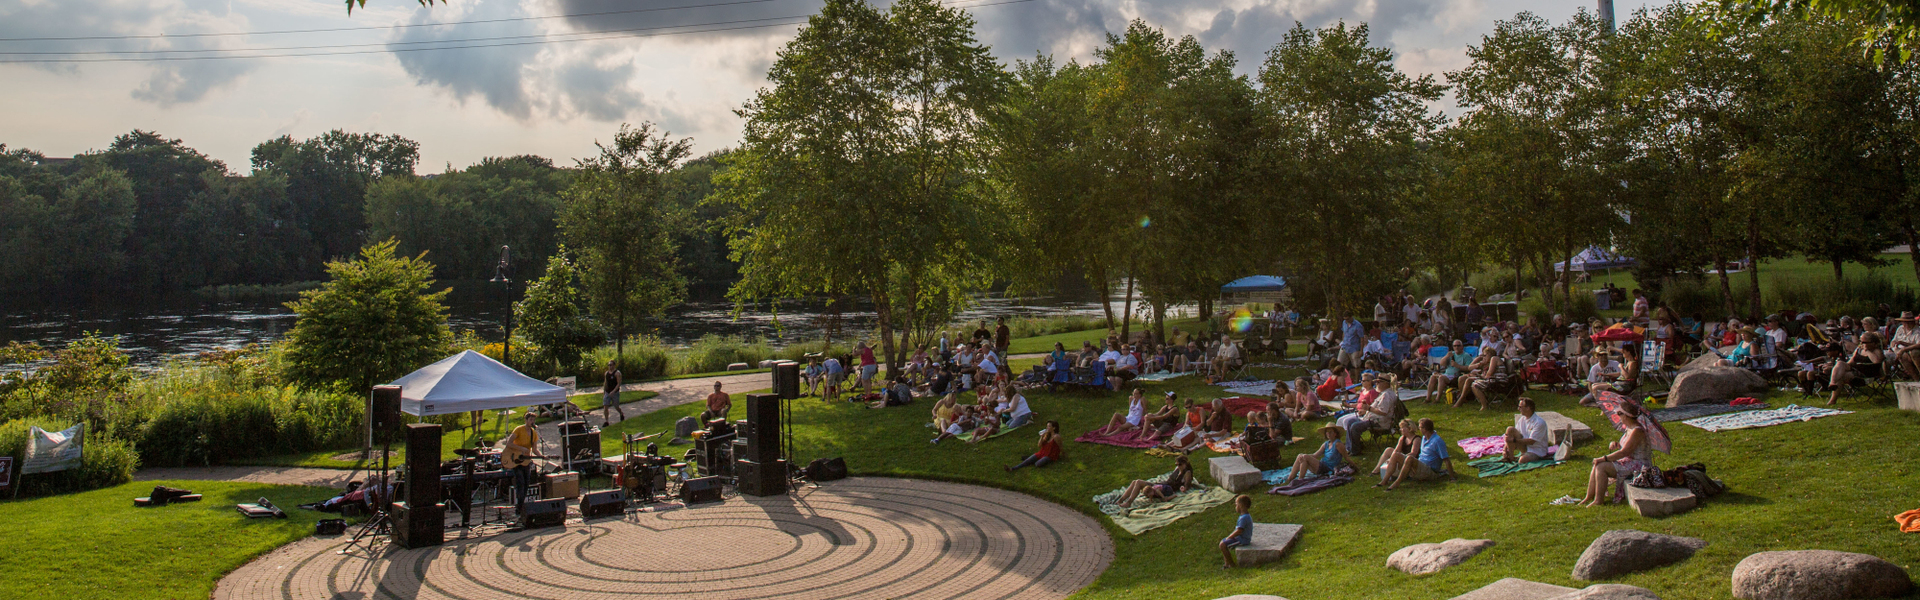 Music lovers in Eau Claire enjoying the Sounds Like Summer Concert Series in Phoenix Park.